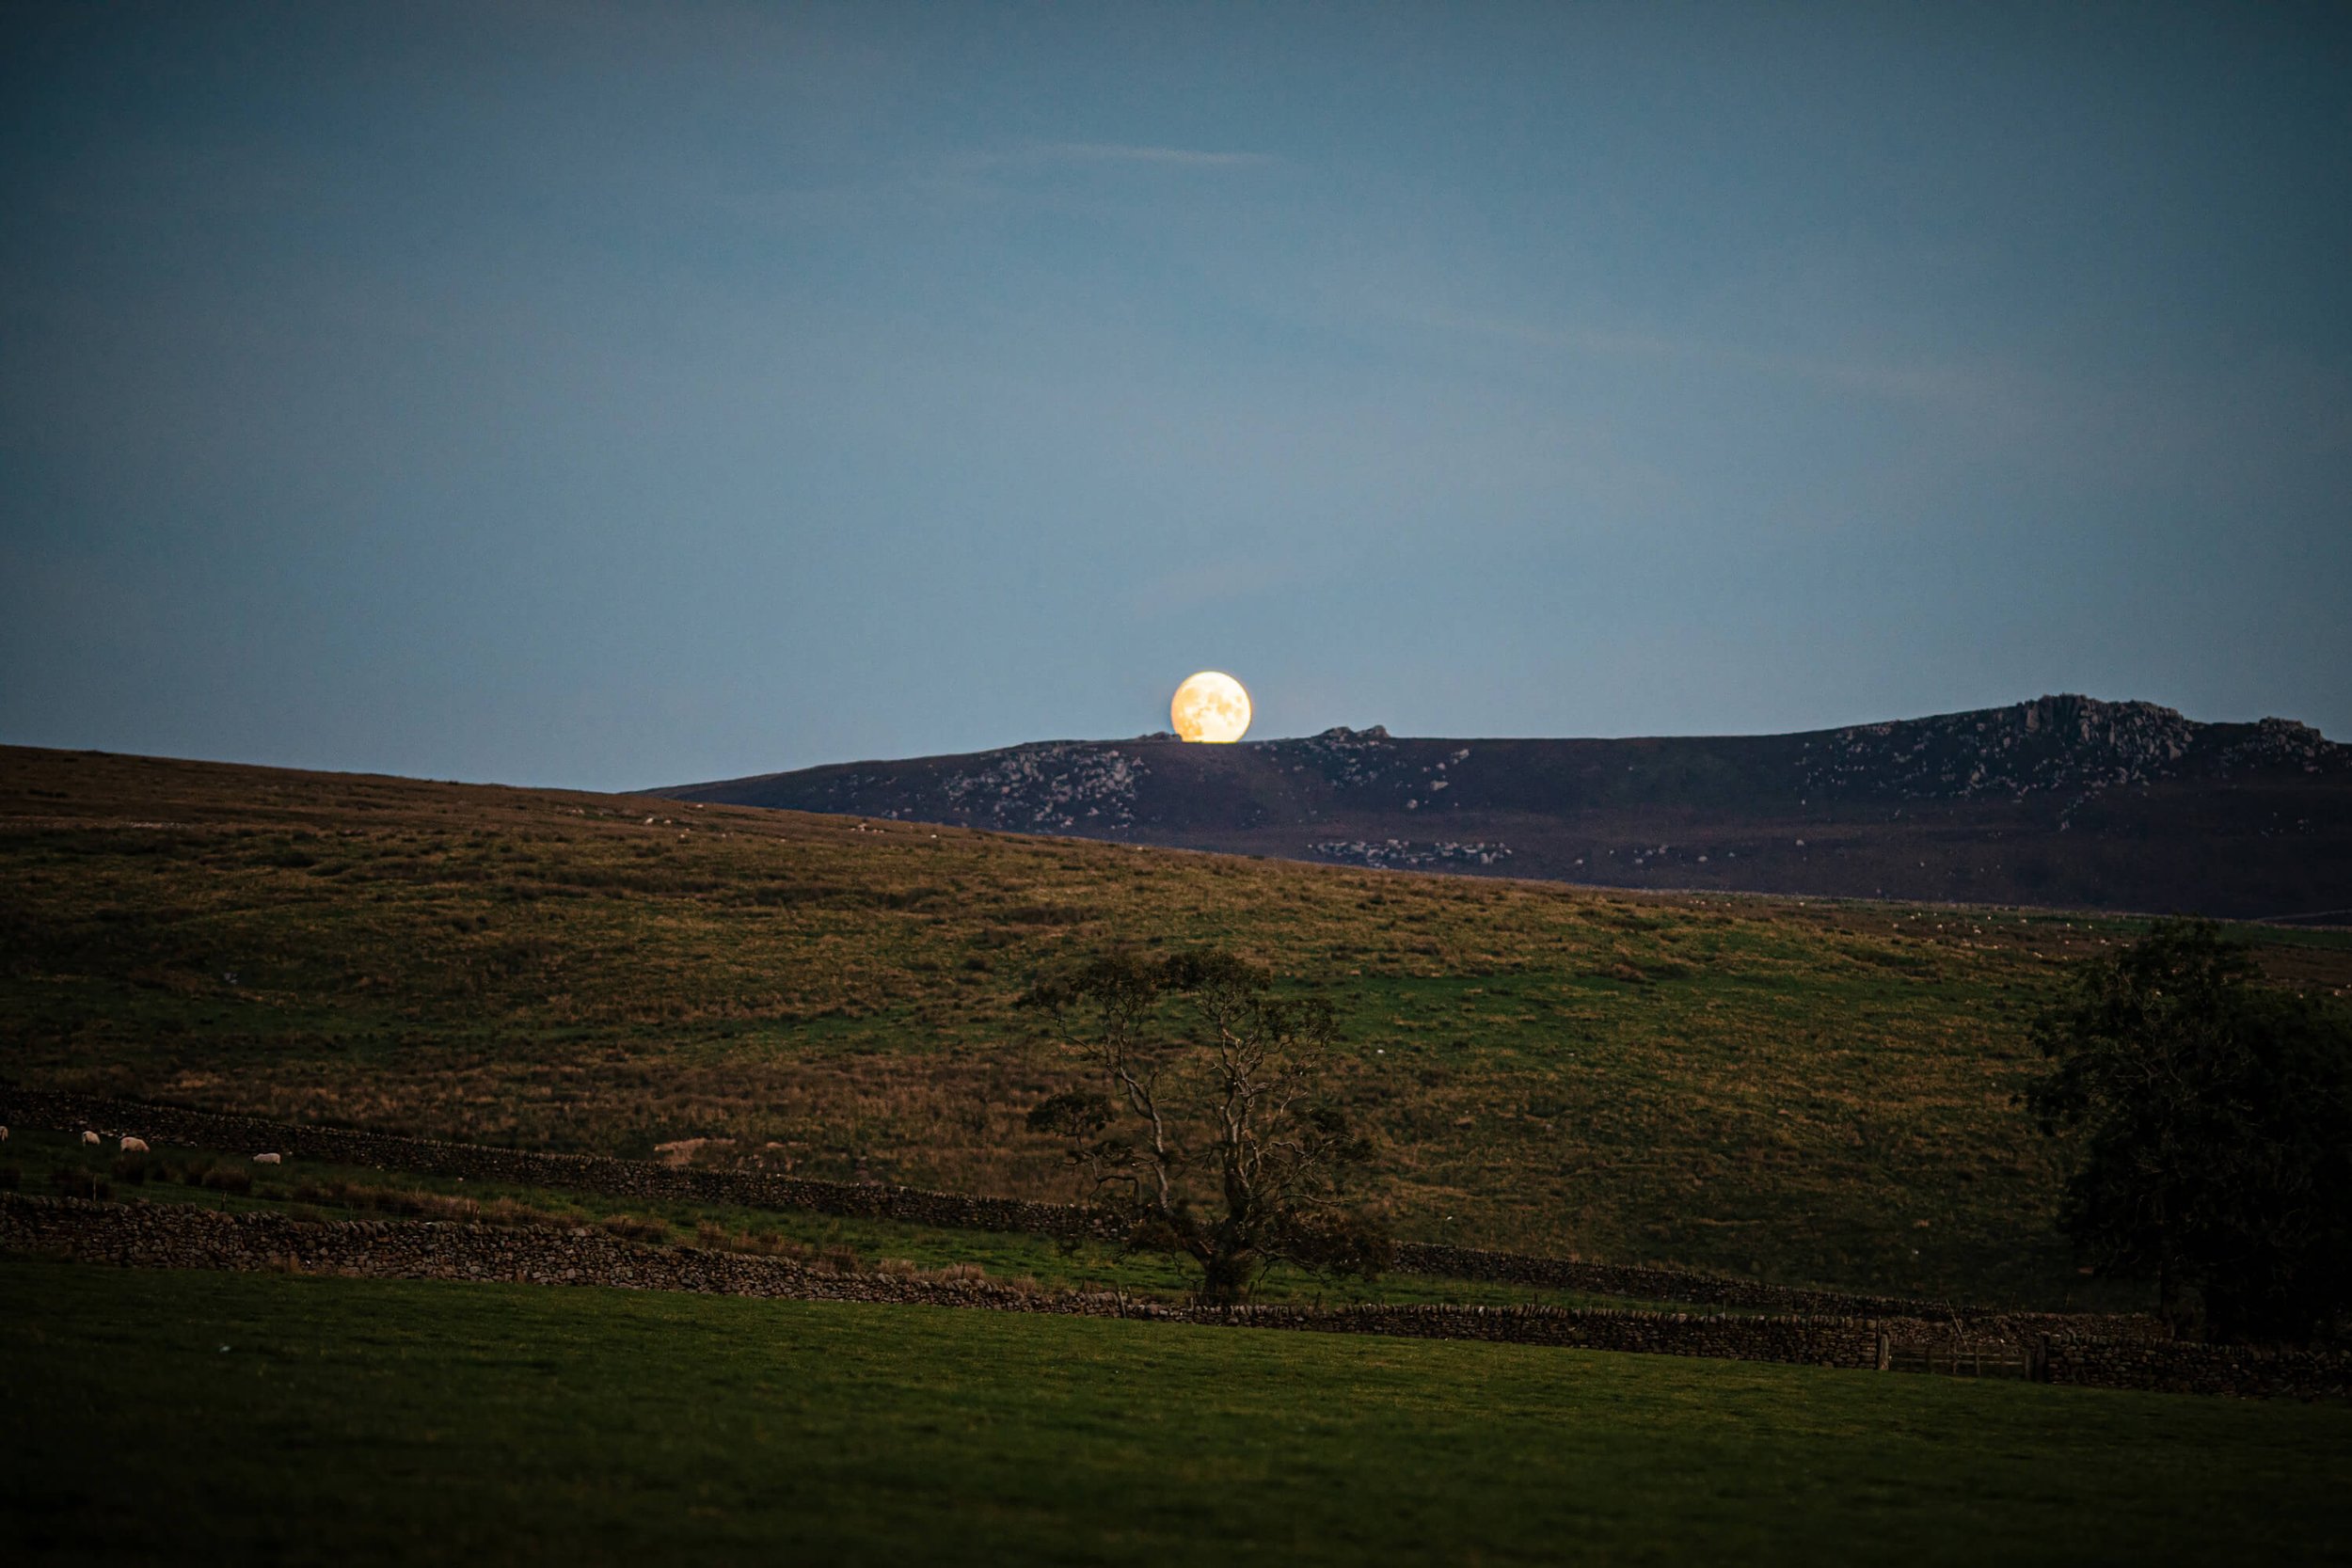 The moon rising over the rolling Yorkshire hills